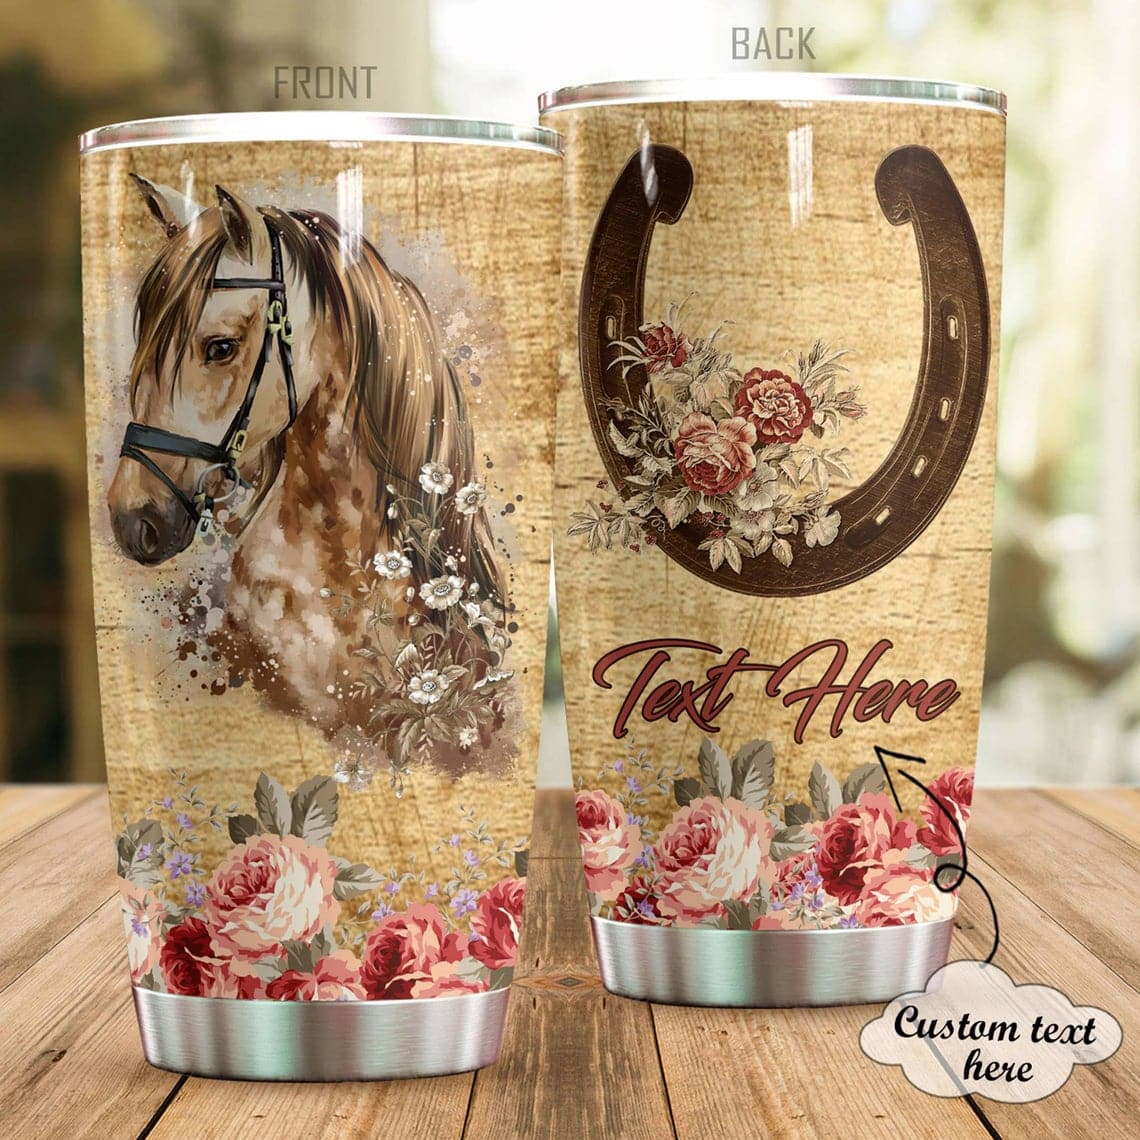 Make It Personal with This Horse Tumbler